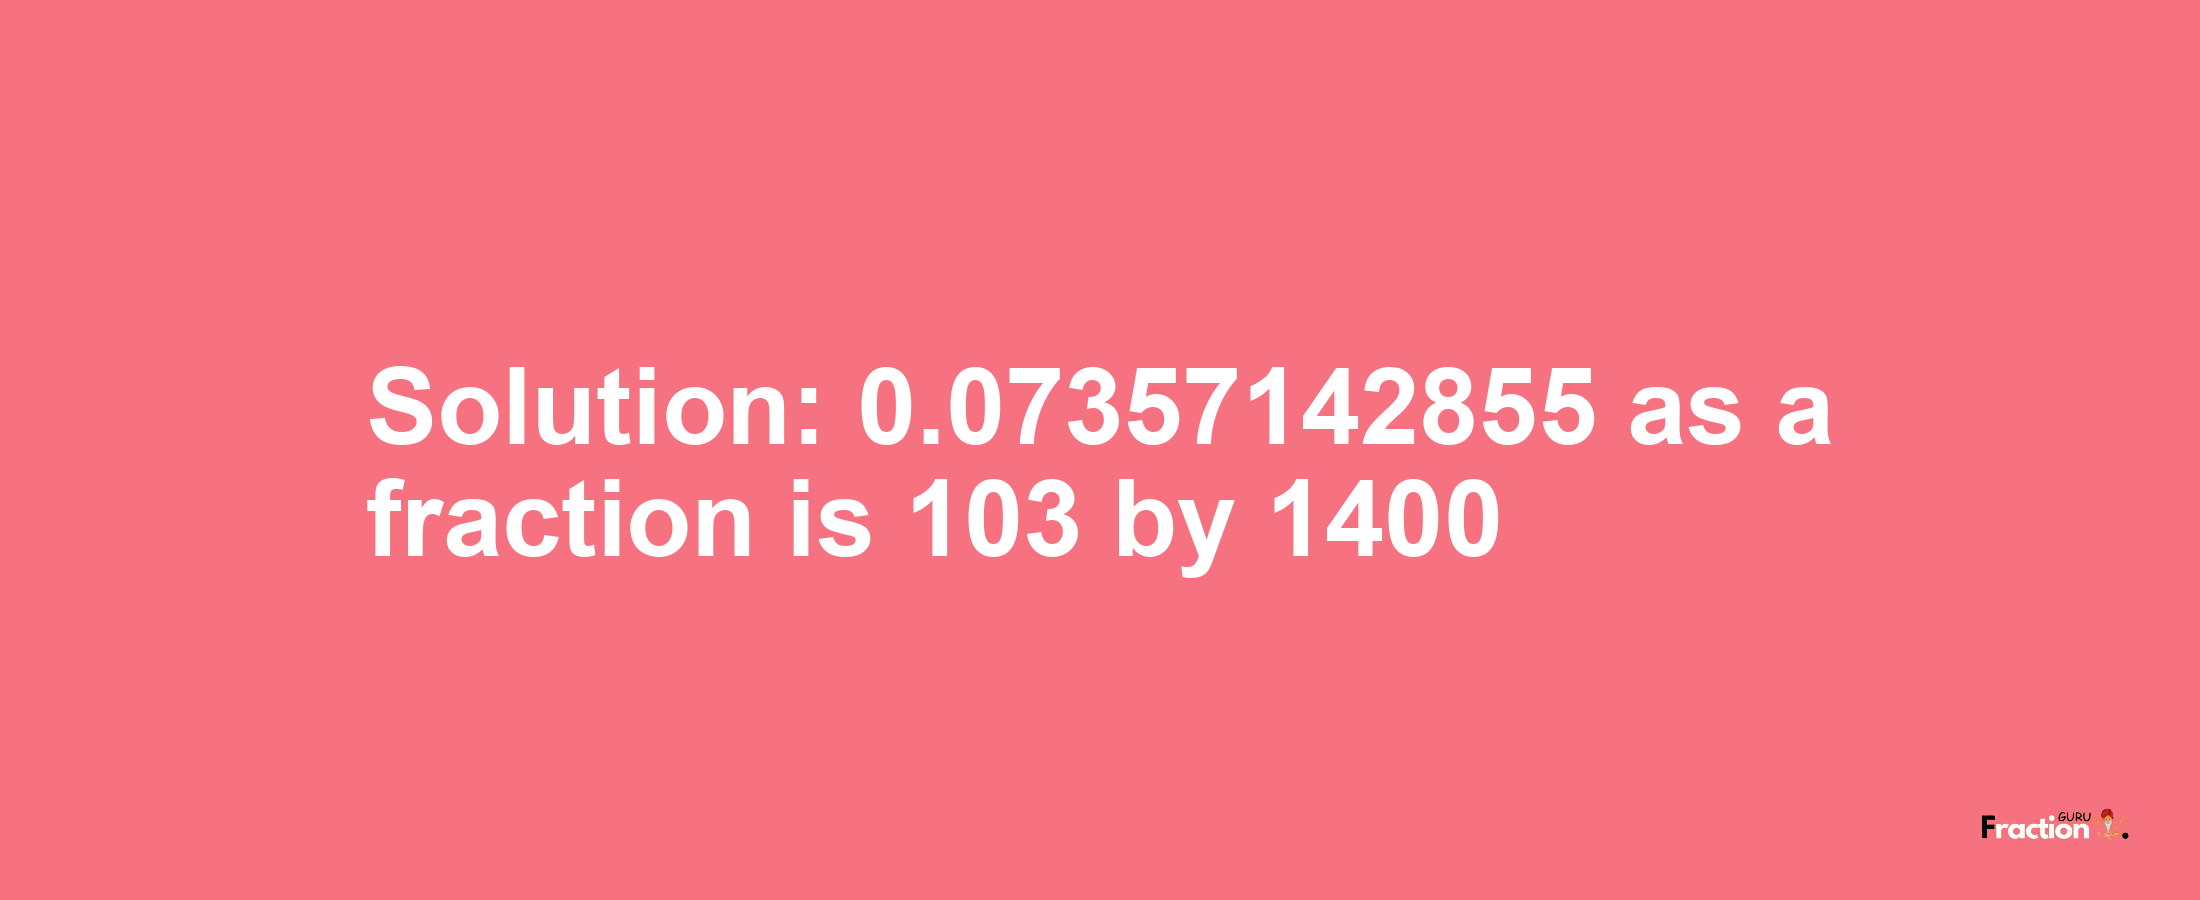 Solution:0.07357142855 as a fraction is 103/1400